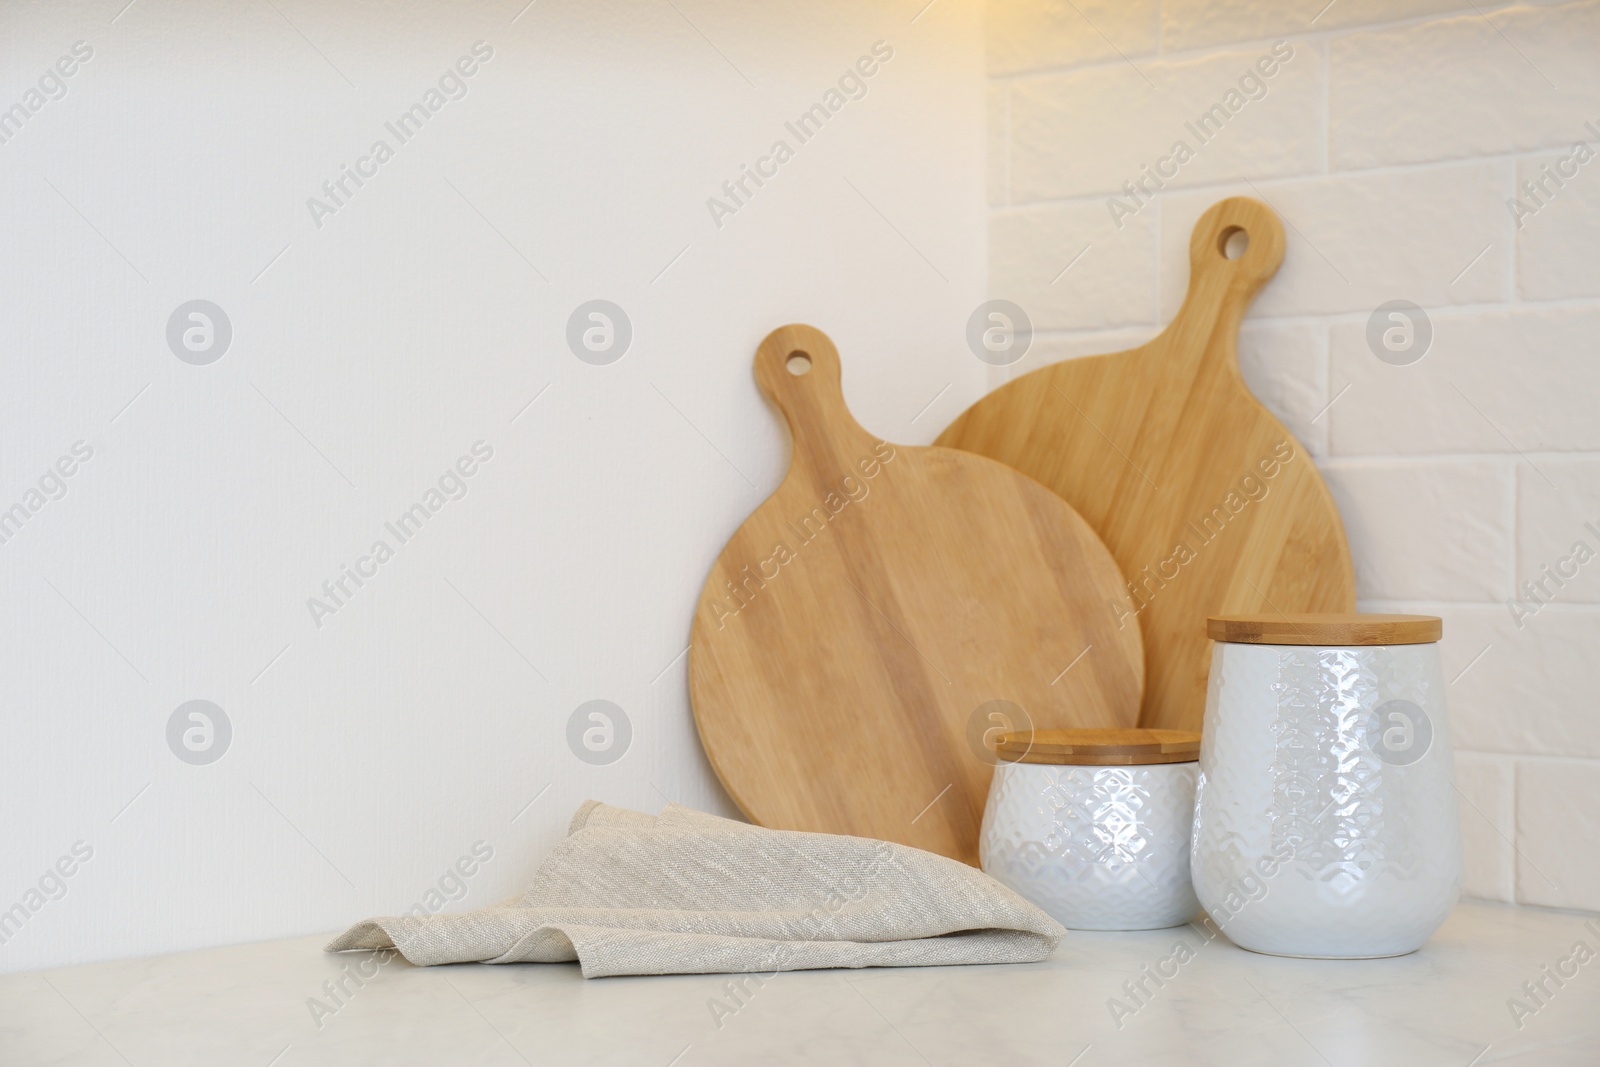 Photo of Wooden boards, napkin and kitchen items on countertop indoors